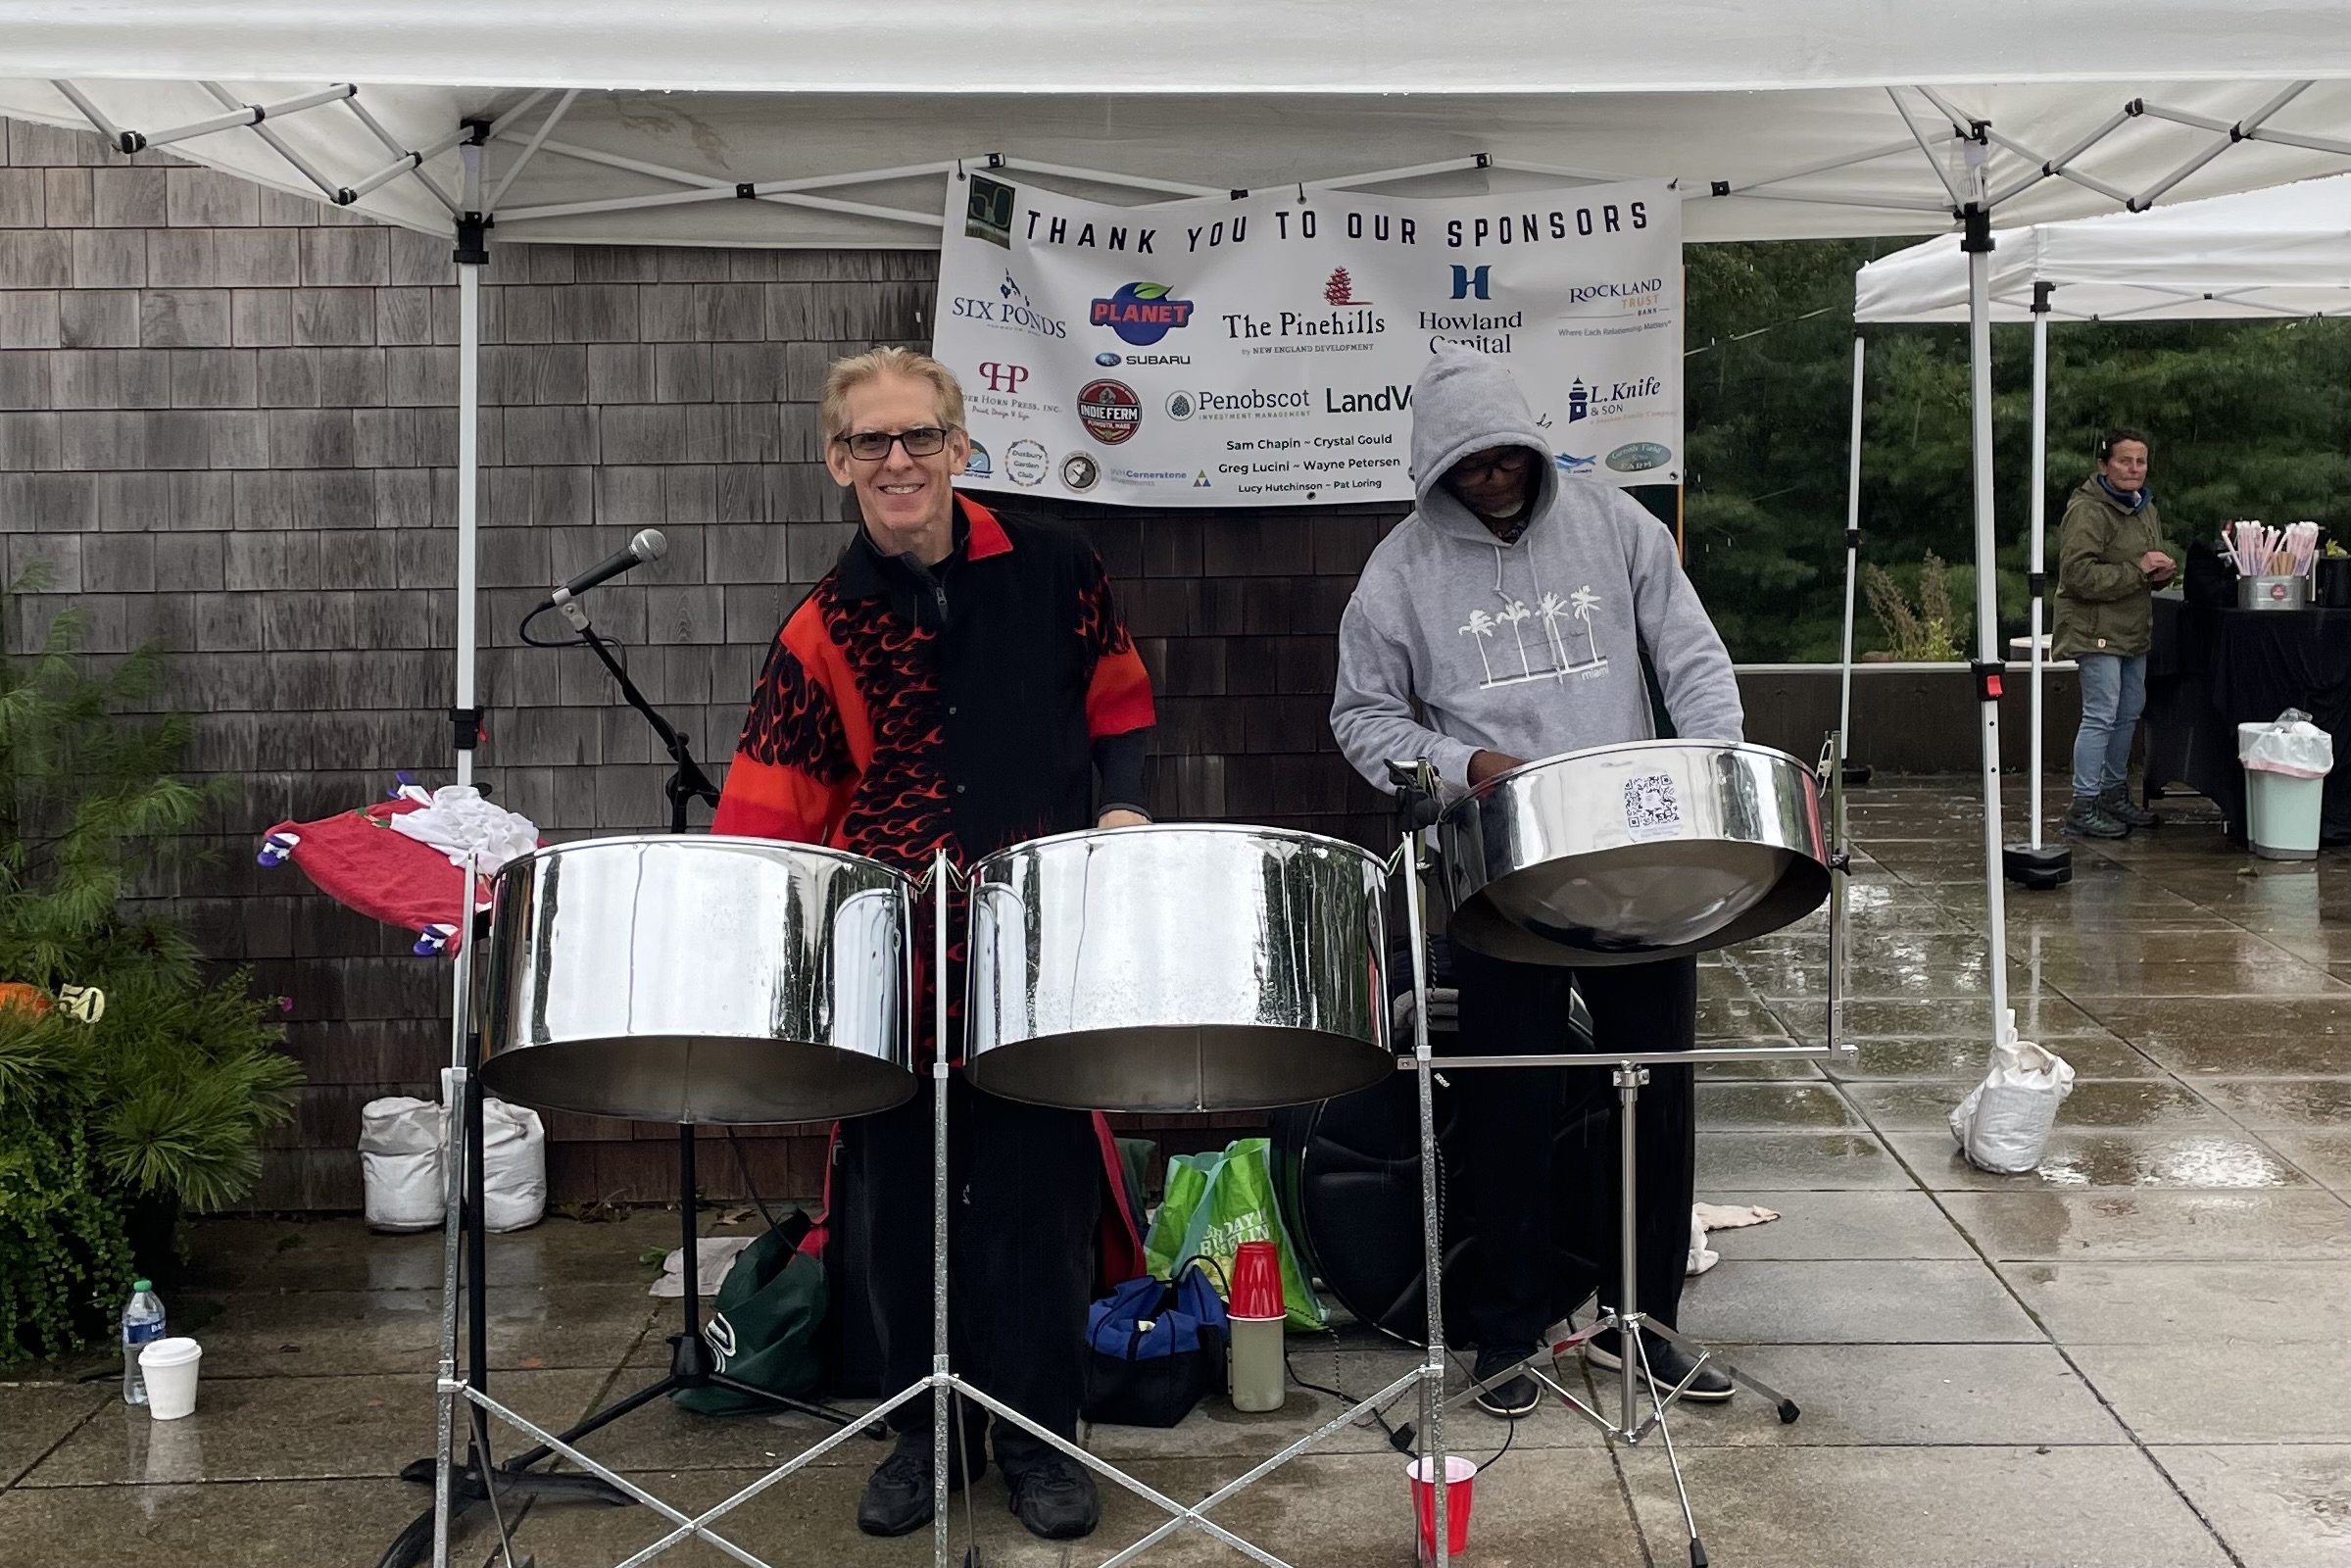 The Pan Loco Steel Band performs.